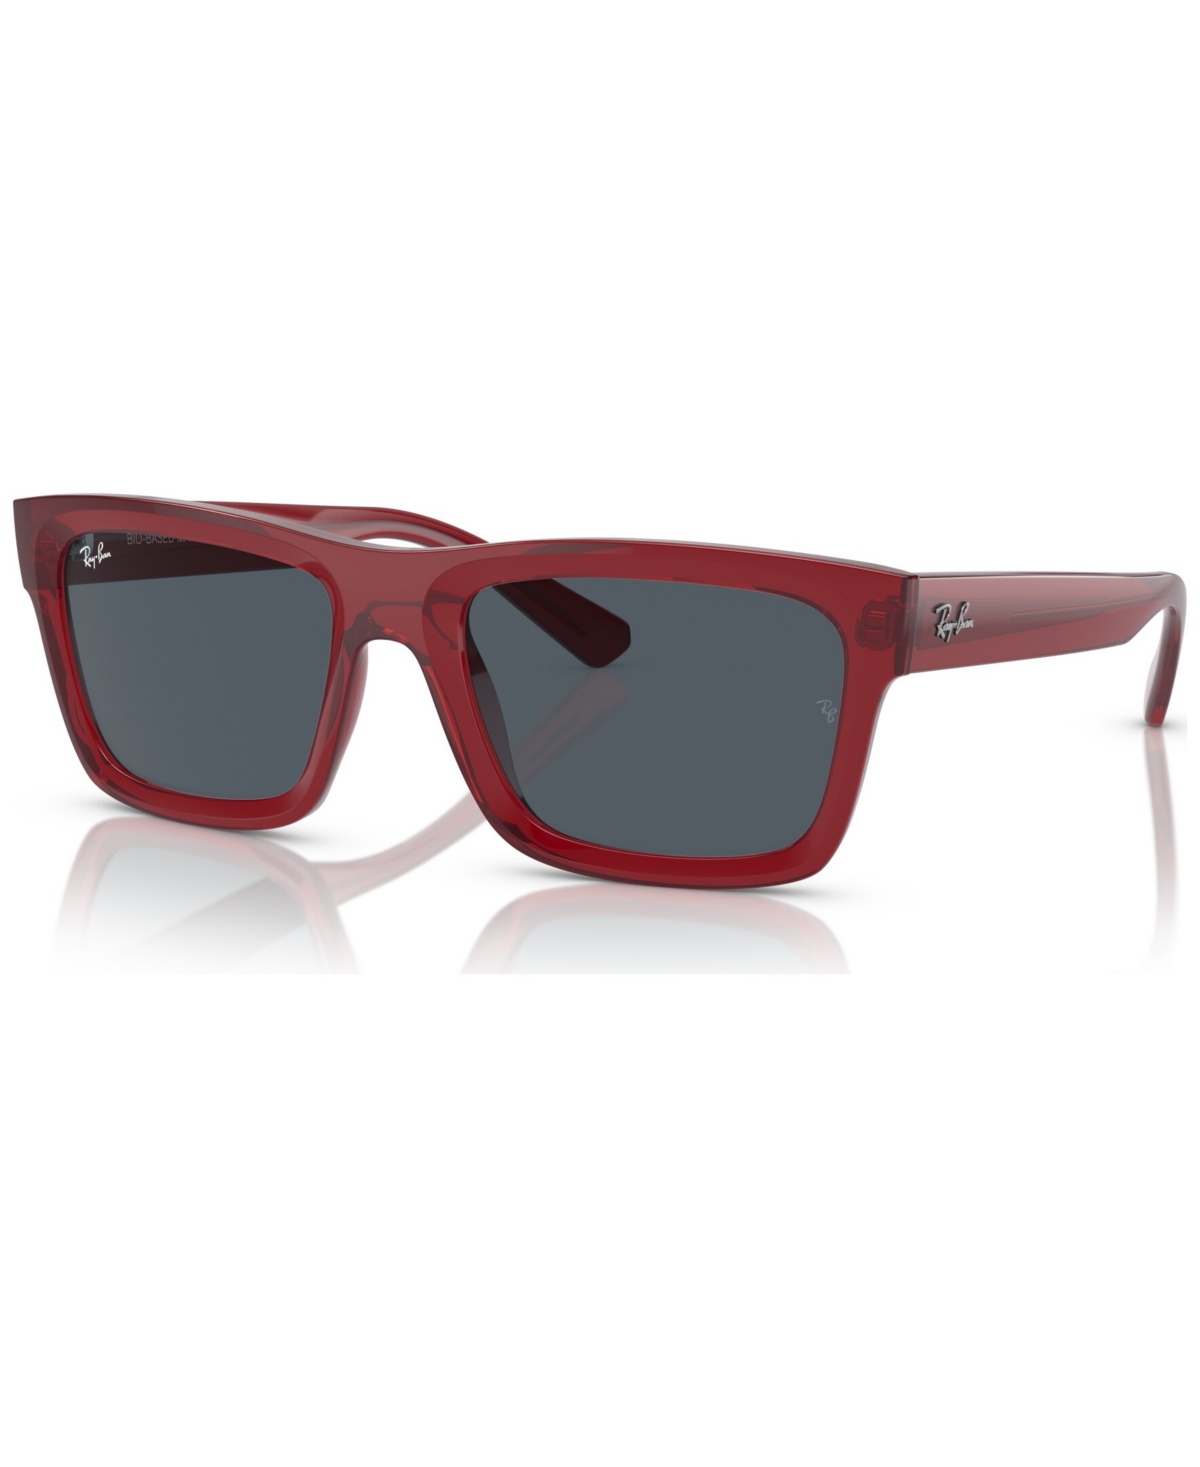 Ray Ban Ray-ban Unisex Sunglasses, Warren Bio-based In Transparent Red